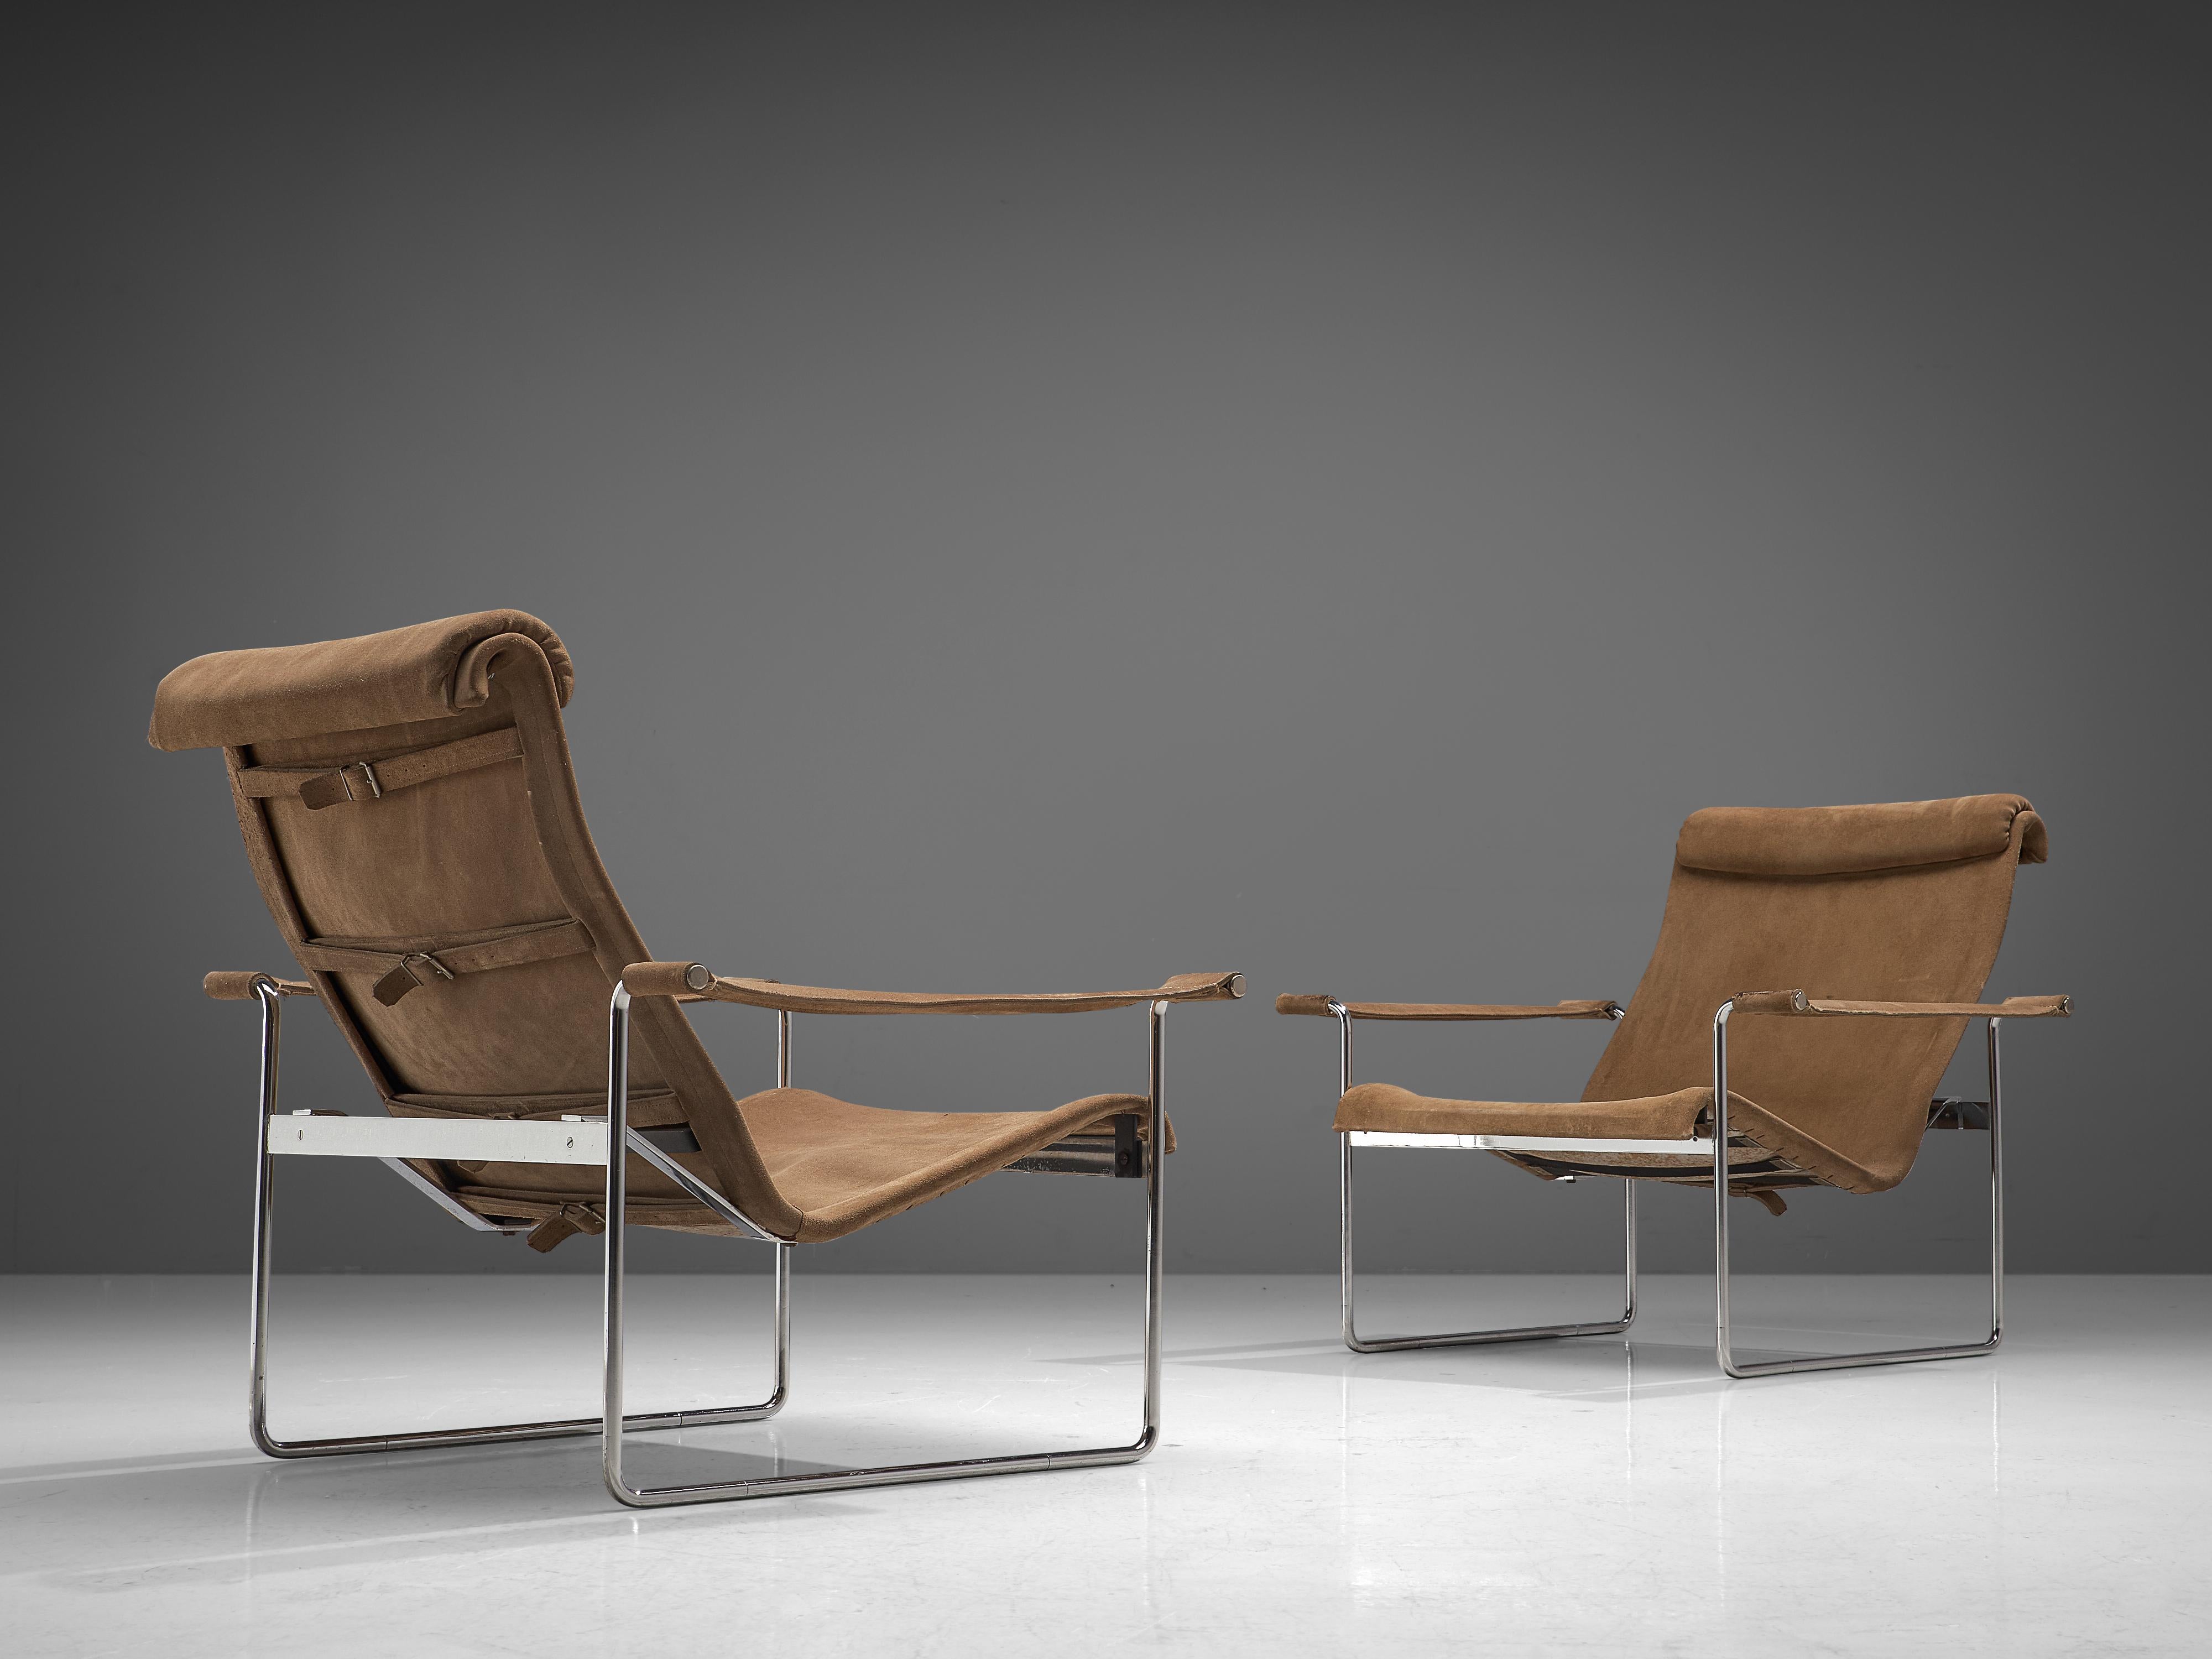 Hans Könecke for Tecta, set of 2 armchairs, suede and metal, Germany, 1960s

This set of lounge chairs is another great example of German Modernist furniture, designed by architect Hans Könecke in the 1960s. This model features a high back, in